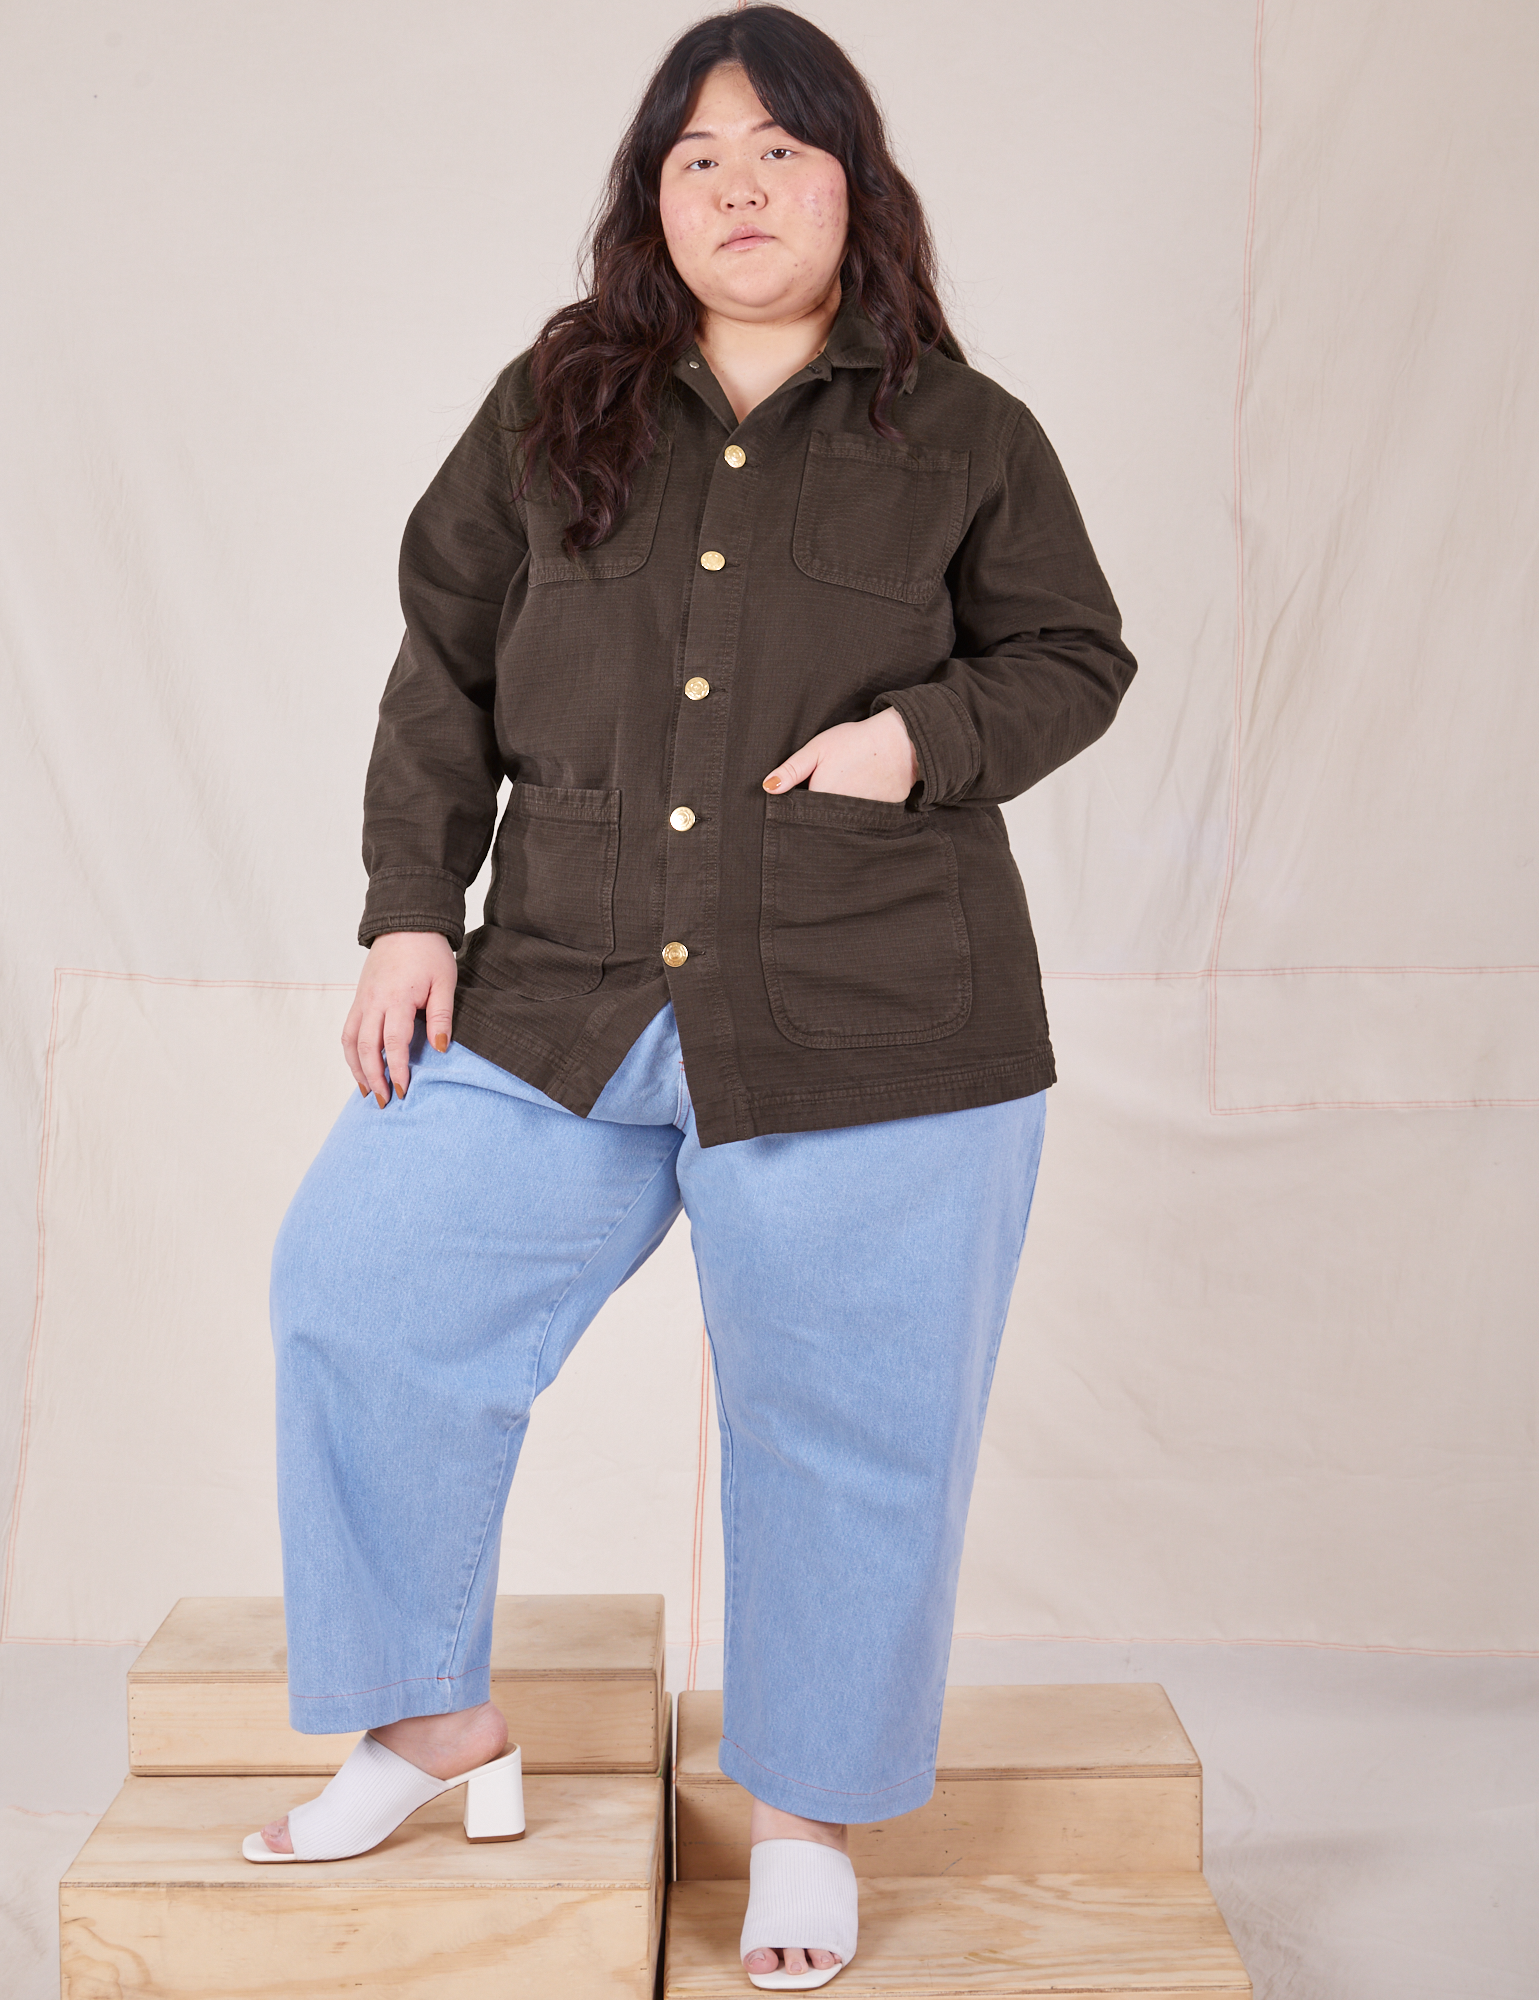 Ashley is wearing a buttoned up Field Coat in Espresso Brown paired with light wash Trouser Jeans